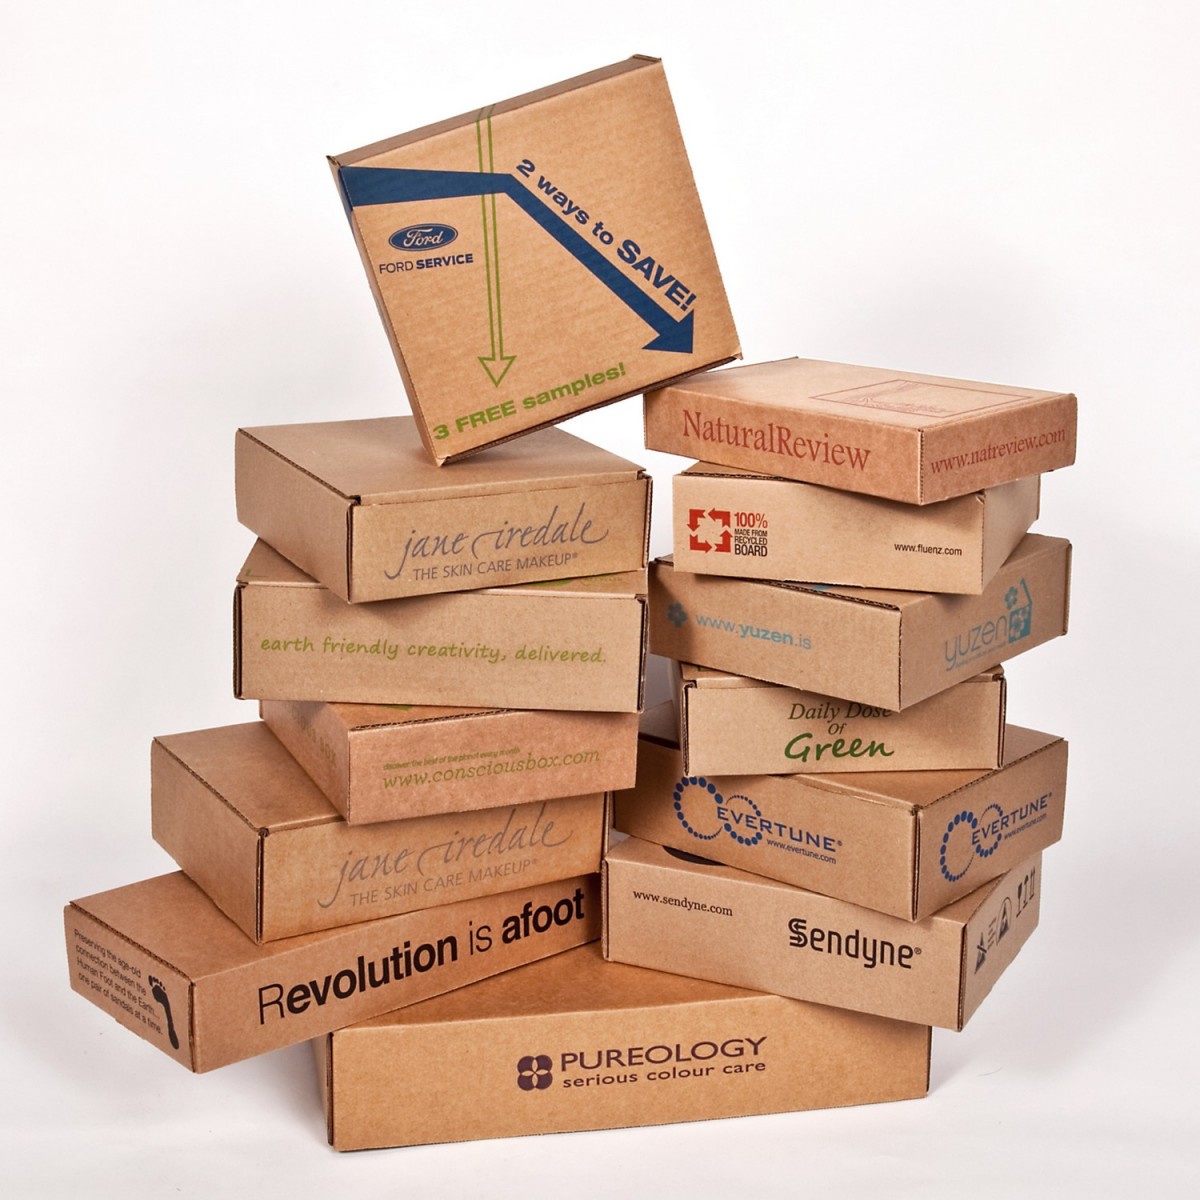 How Custom Printed Boxes Are Beneficial For Your Business